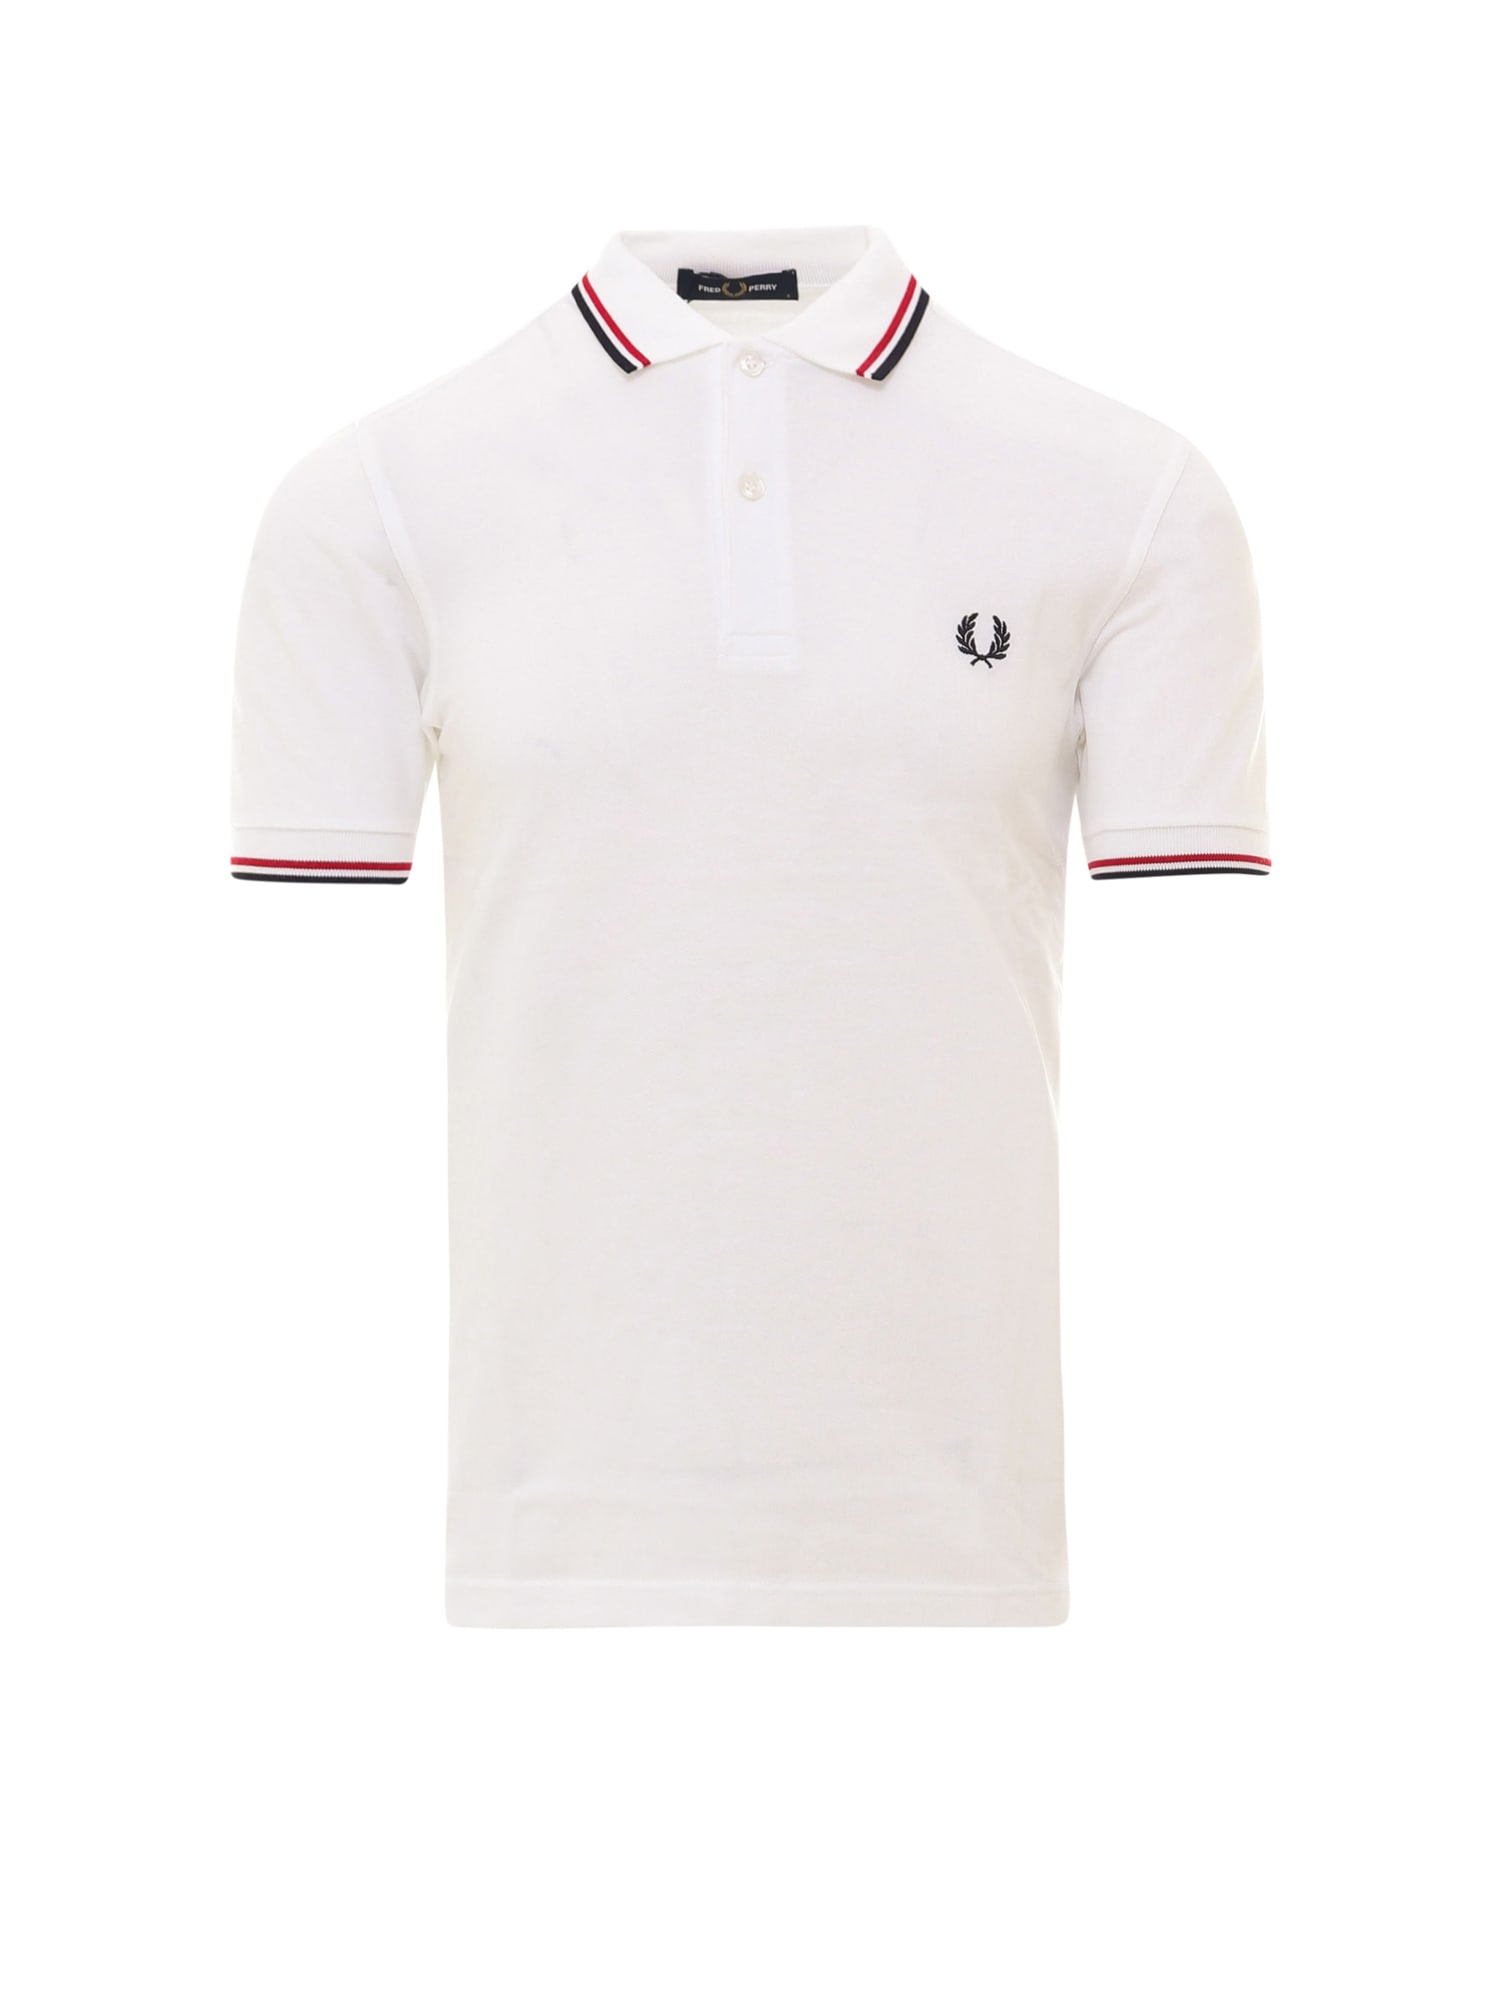 FRED PERRY POLO SHIRT,FPM360037 748